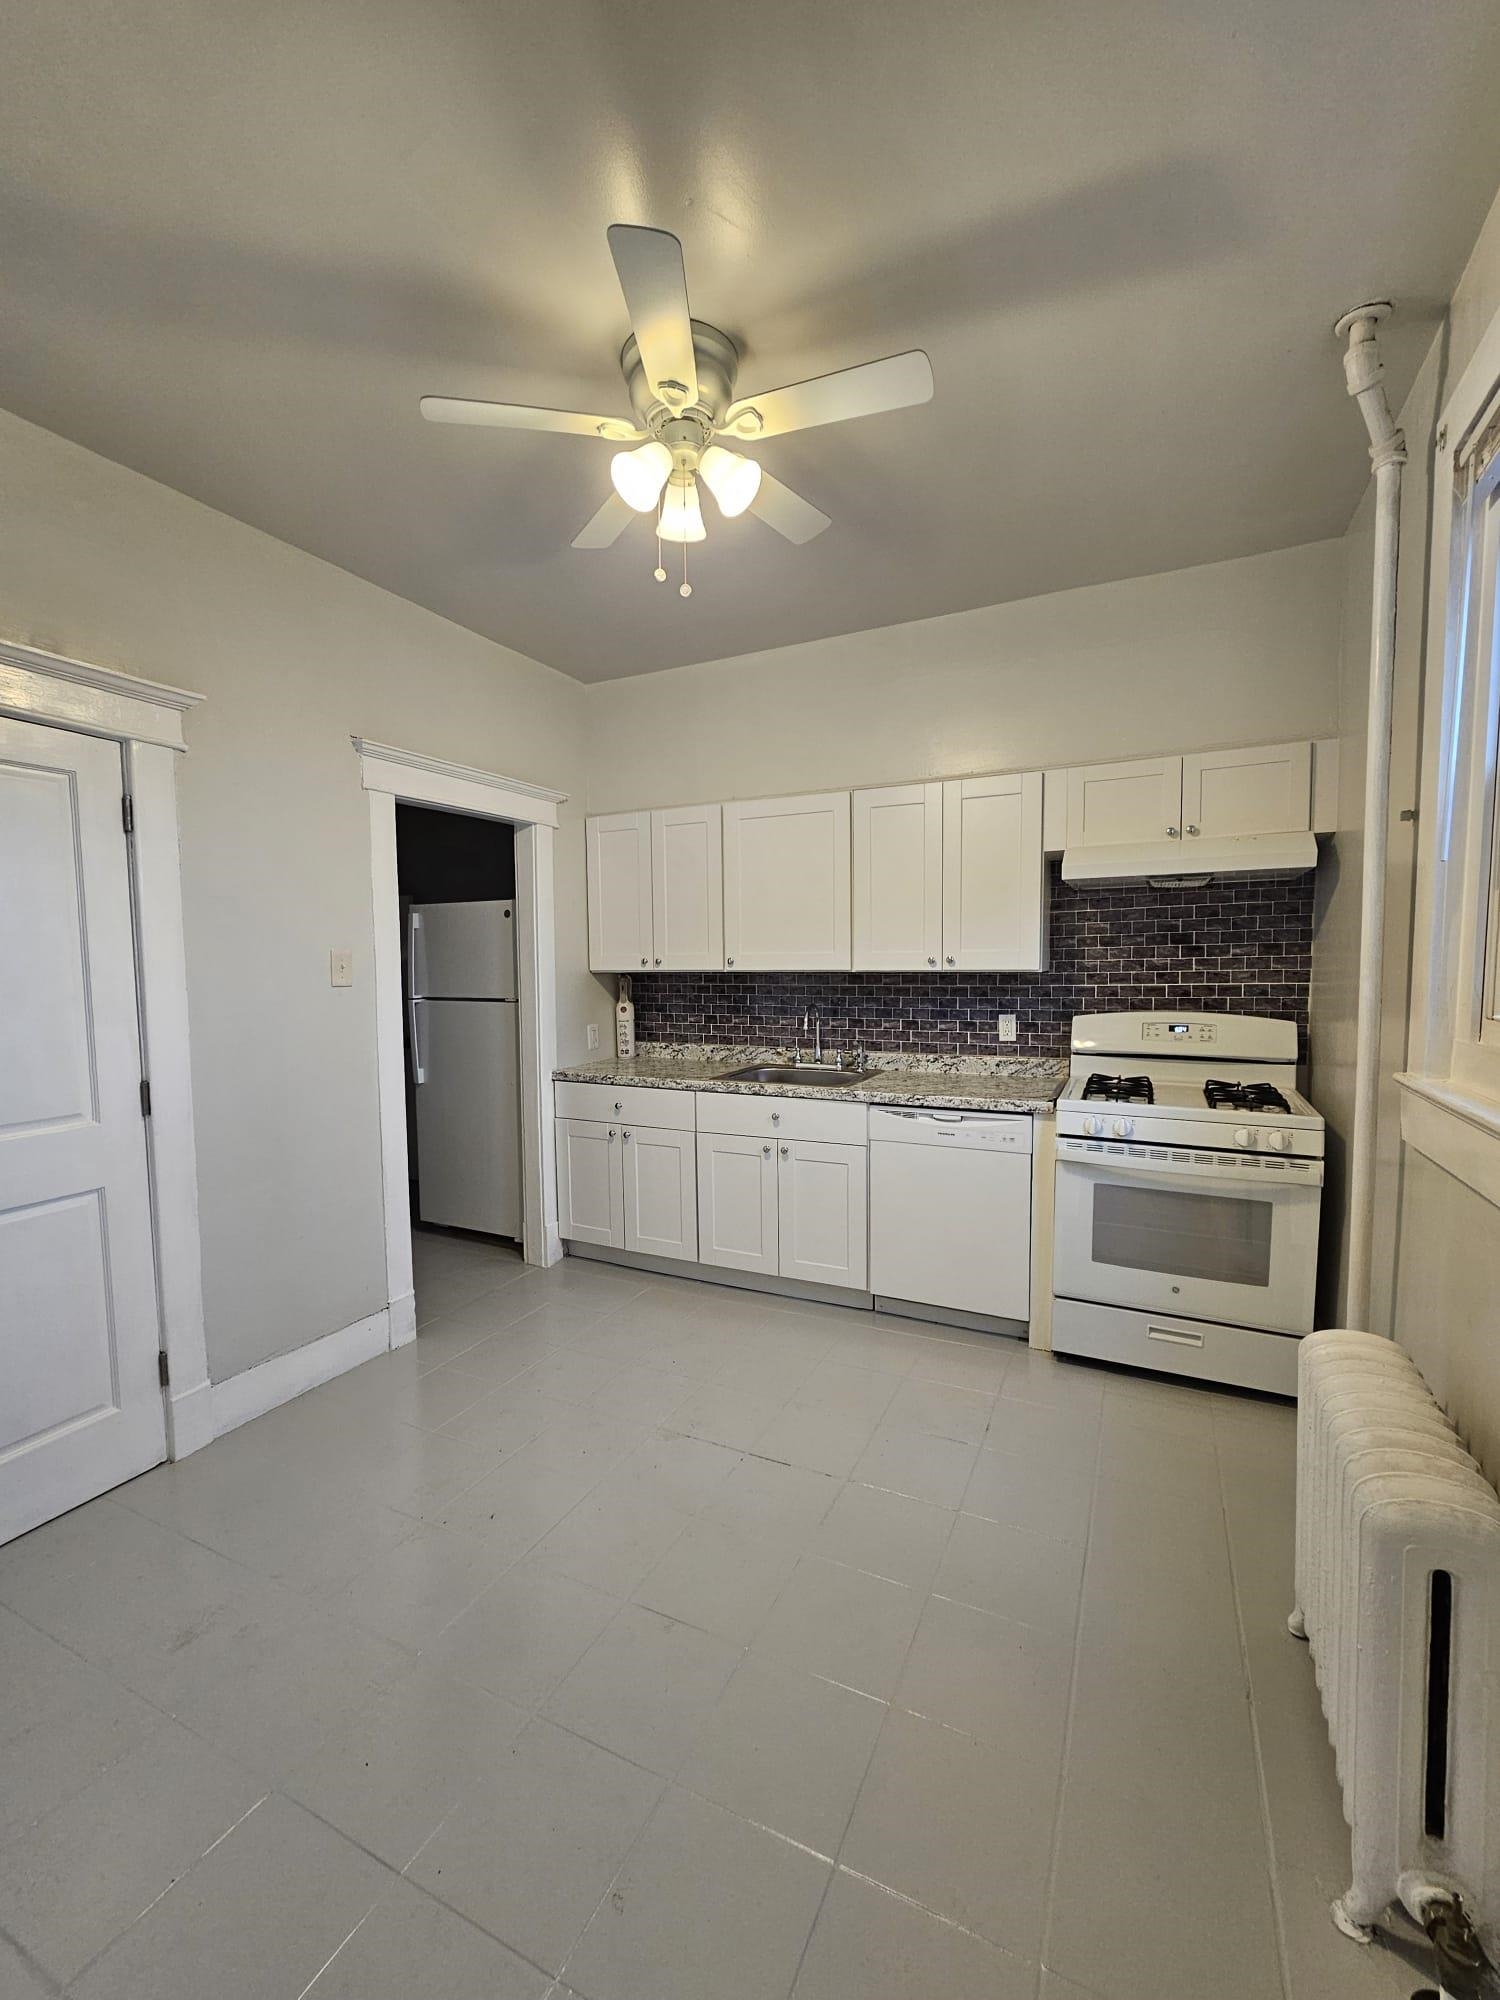 # 240002536 - For Rent in JERSEY CITY - Greenville NJ